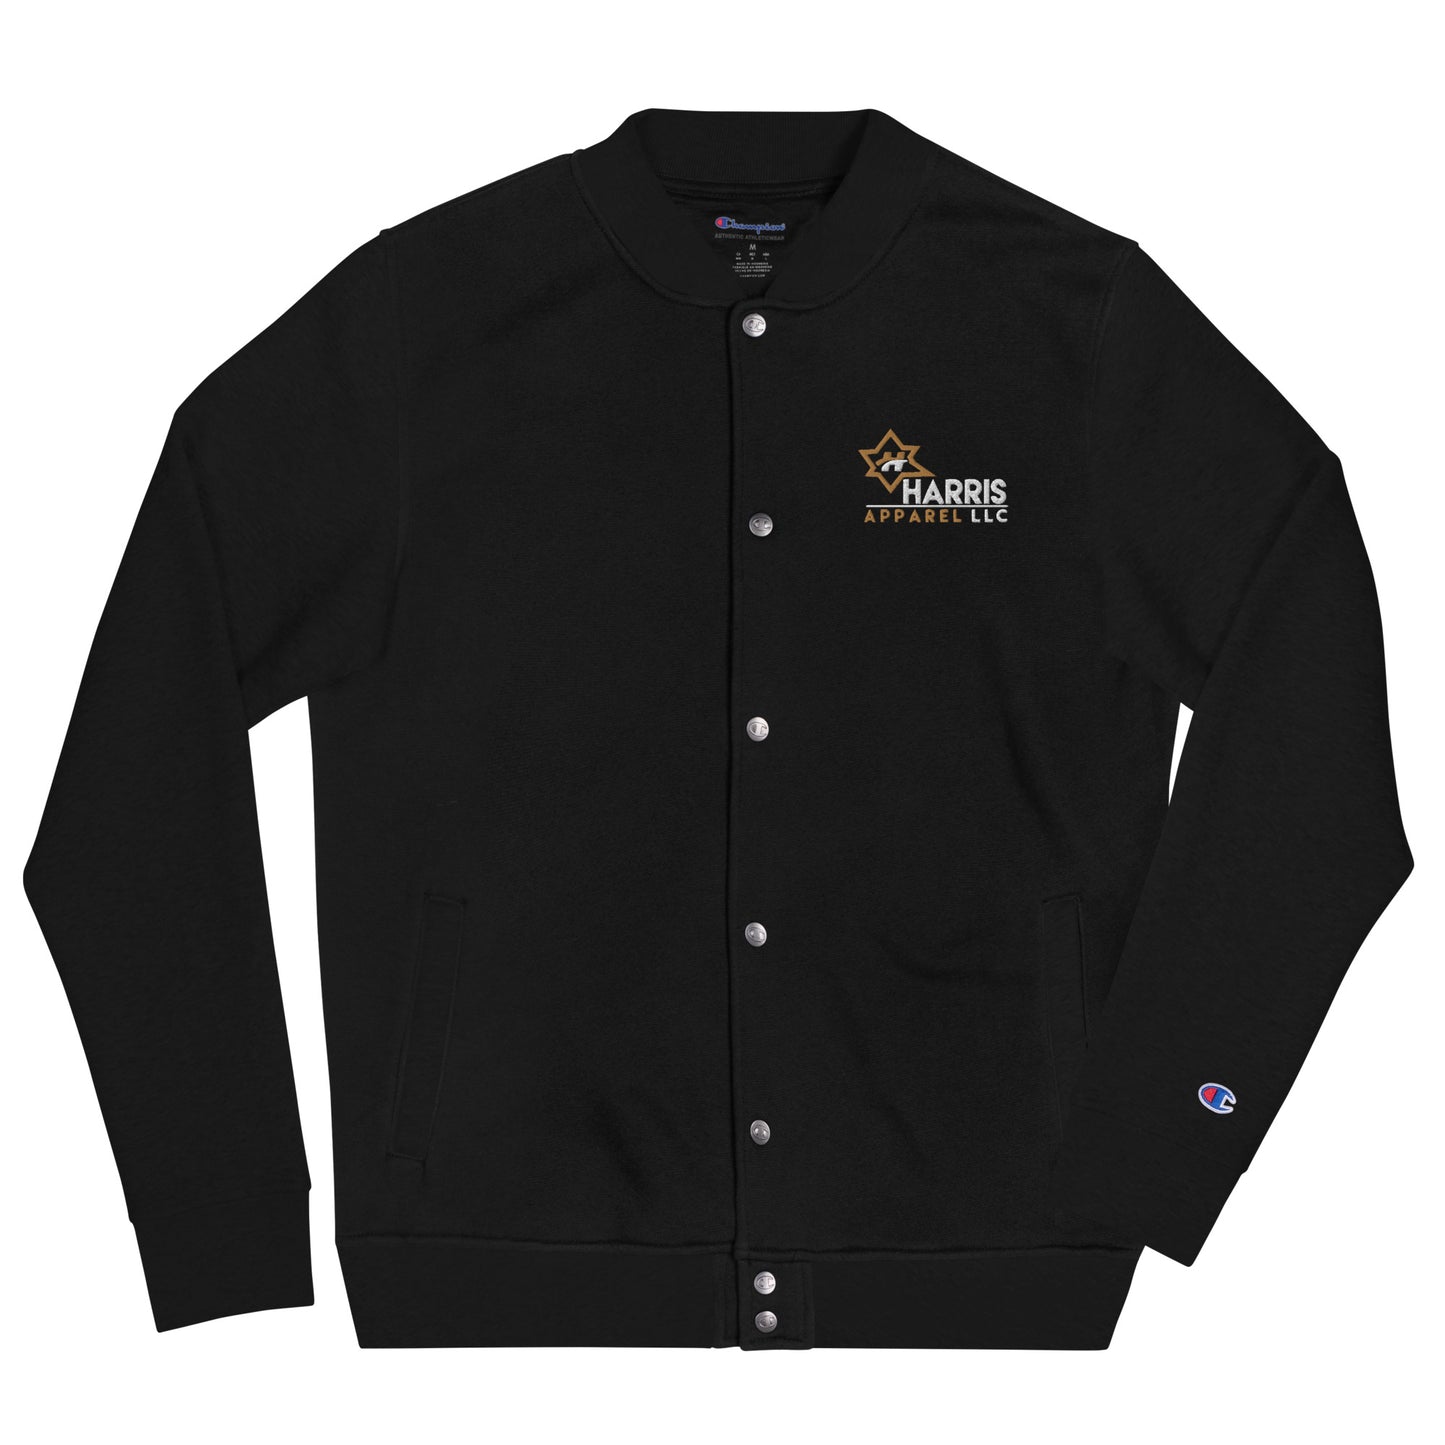 Harris Apparel Embroidered Champion Bomber Jacket